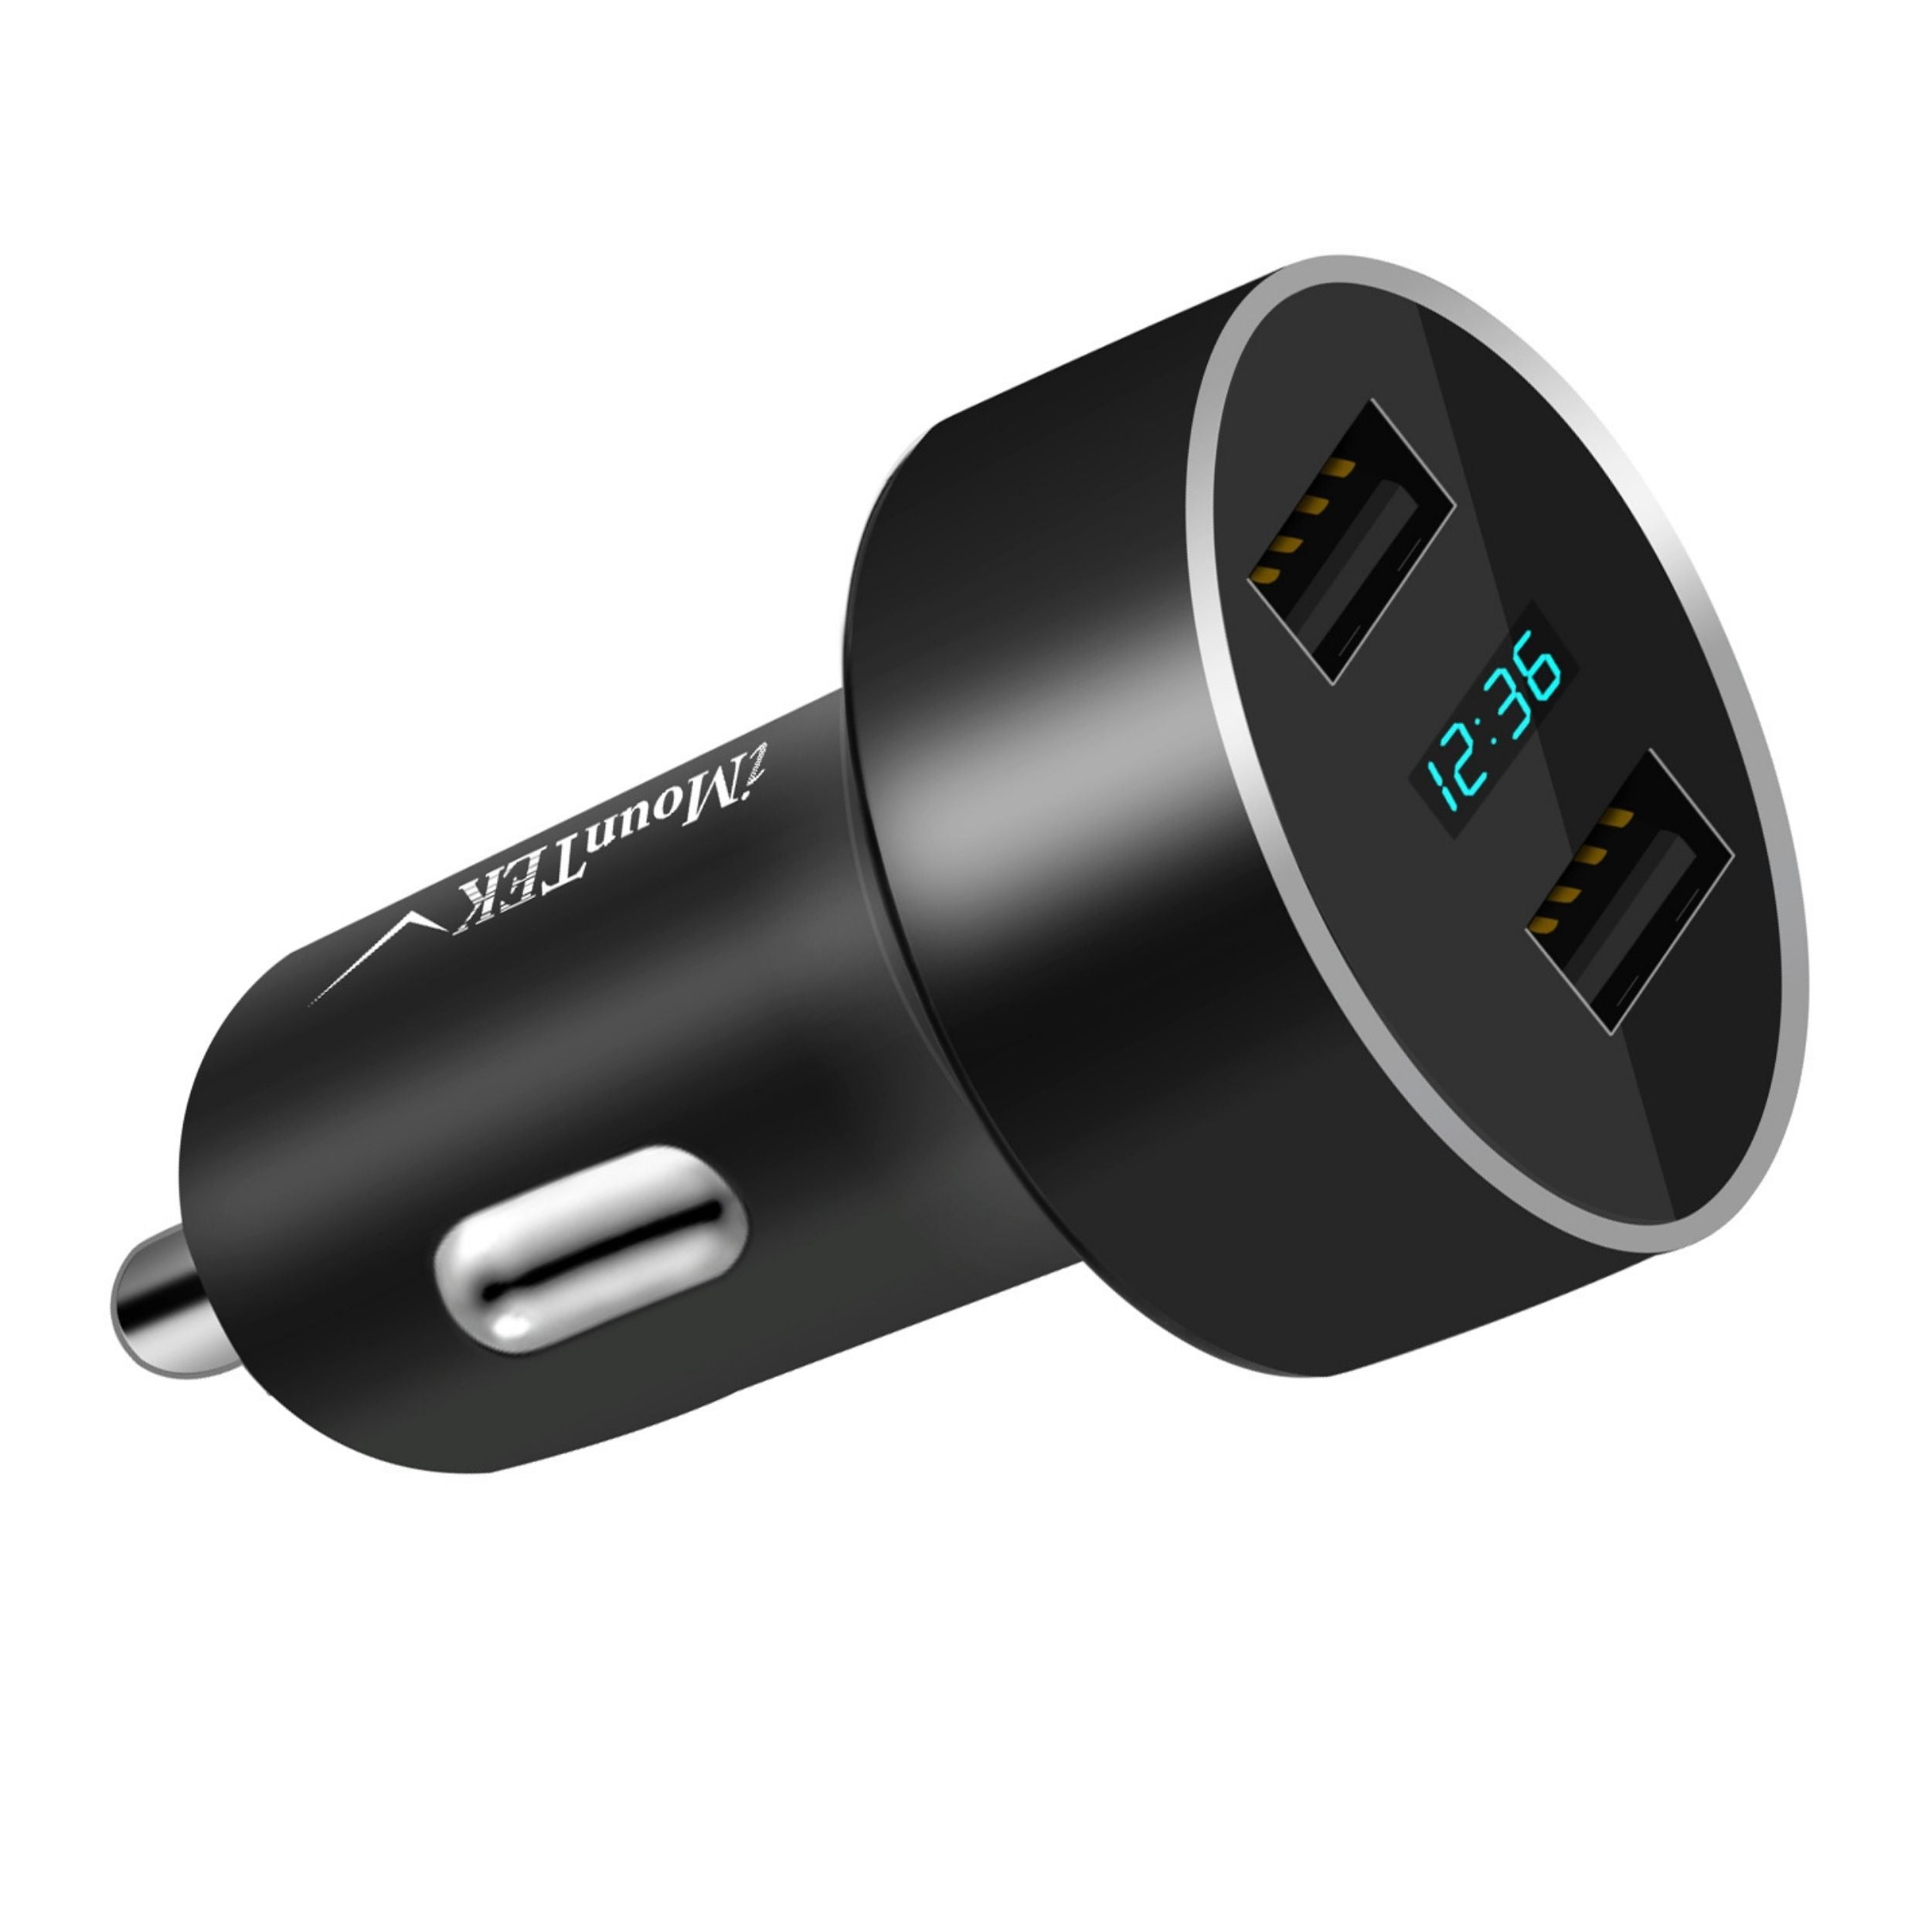 title:15W/3.1A Dual USB Car Charger Adapter - Fast Aluminum Alloy Charging for iPhone XR XS & Tablet PC;color:Black